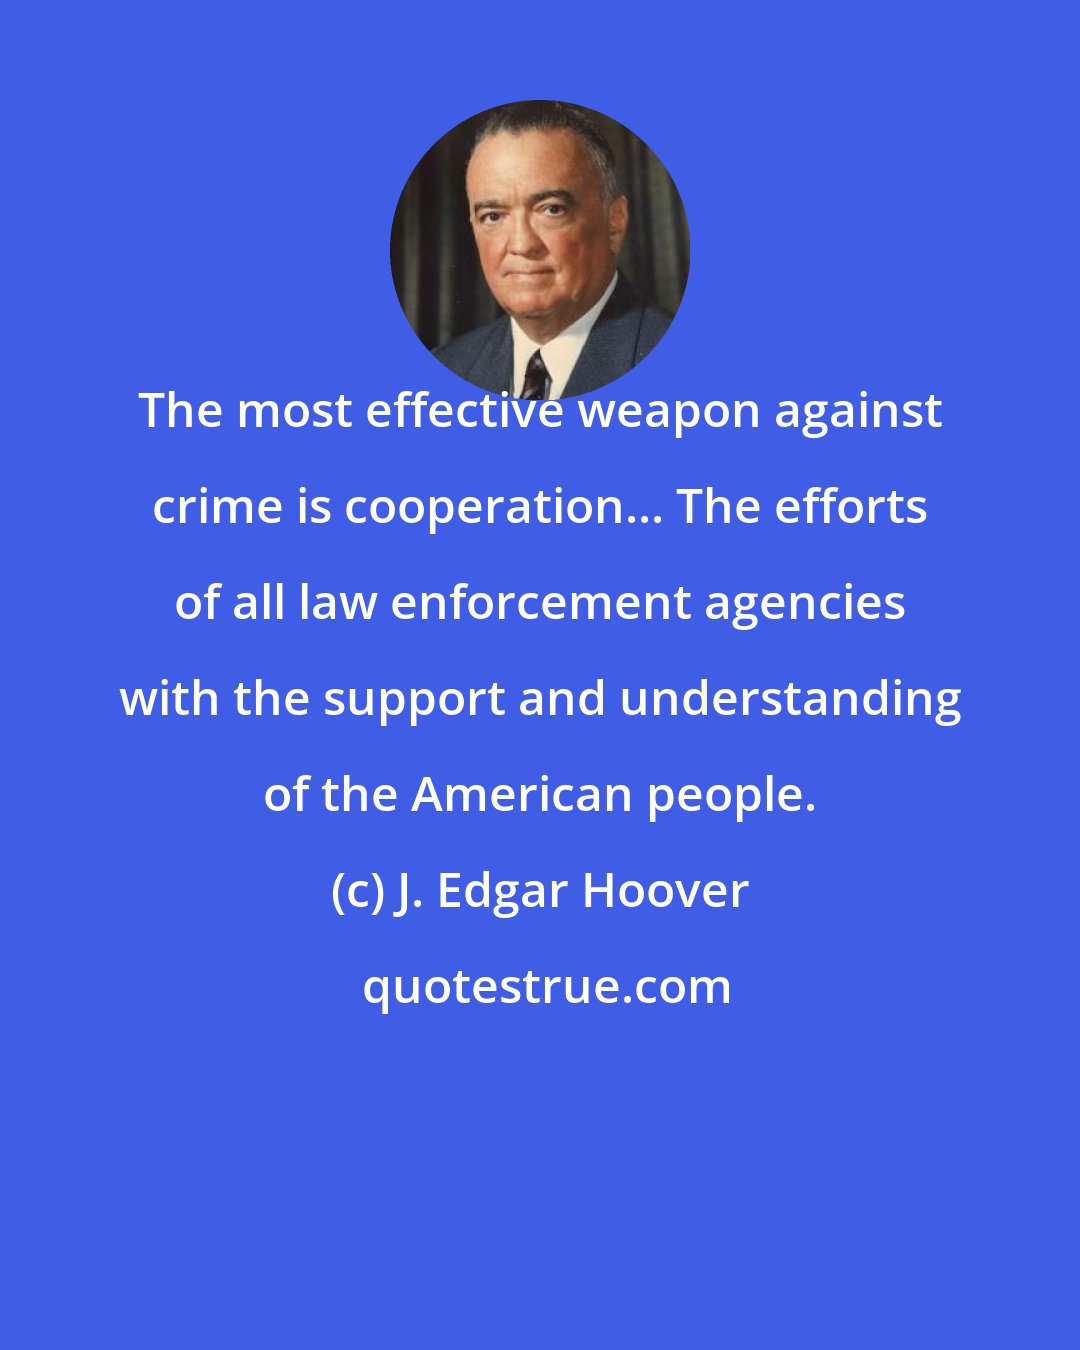 J. Edgar Hoover: The most effective weapon against crime is cooperation... The efforts of all law enforcement agencies with the support and understanding of the American people.